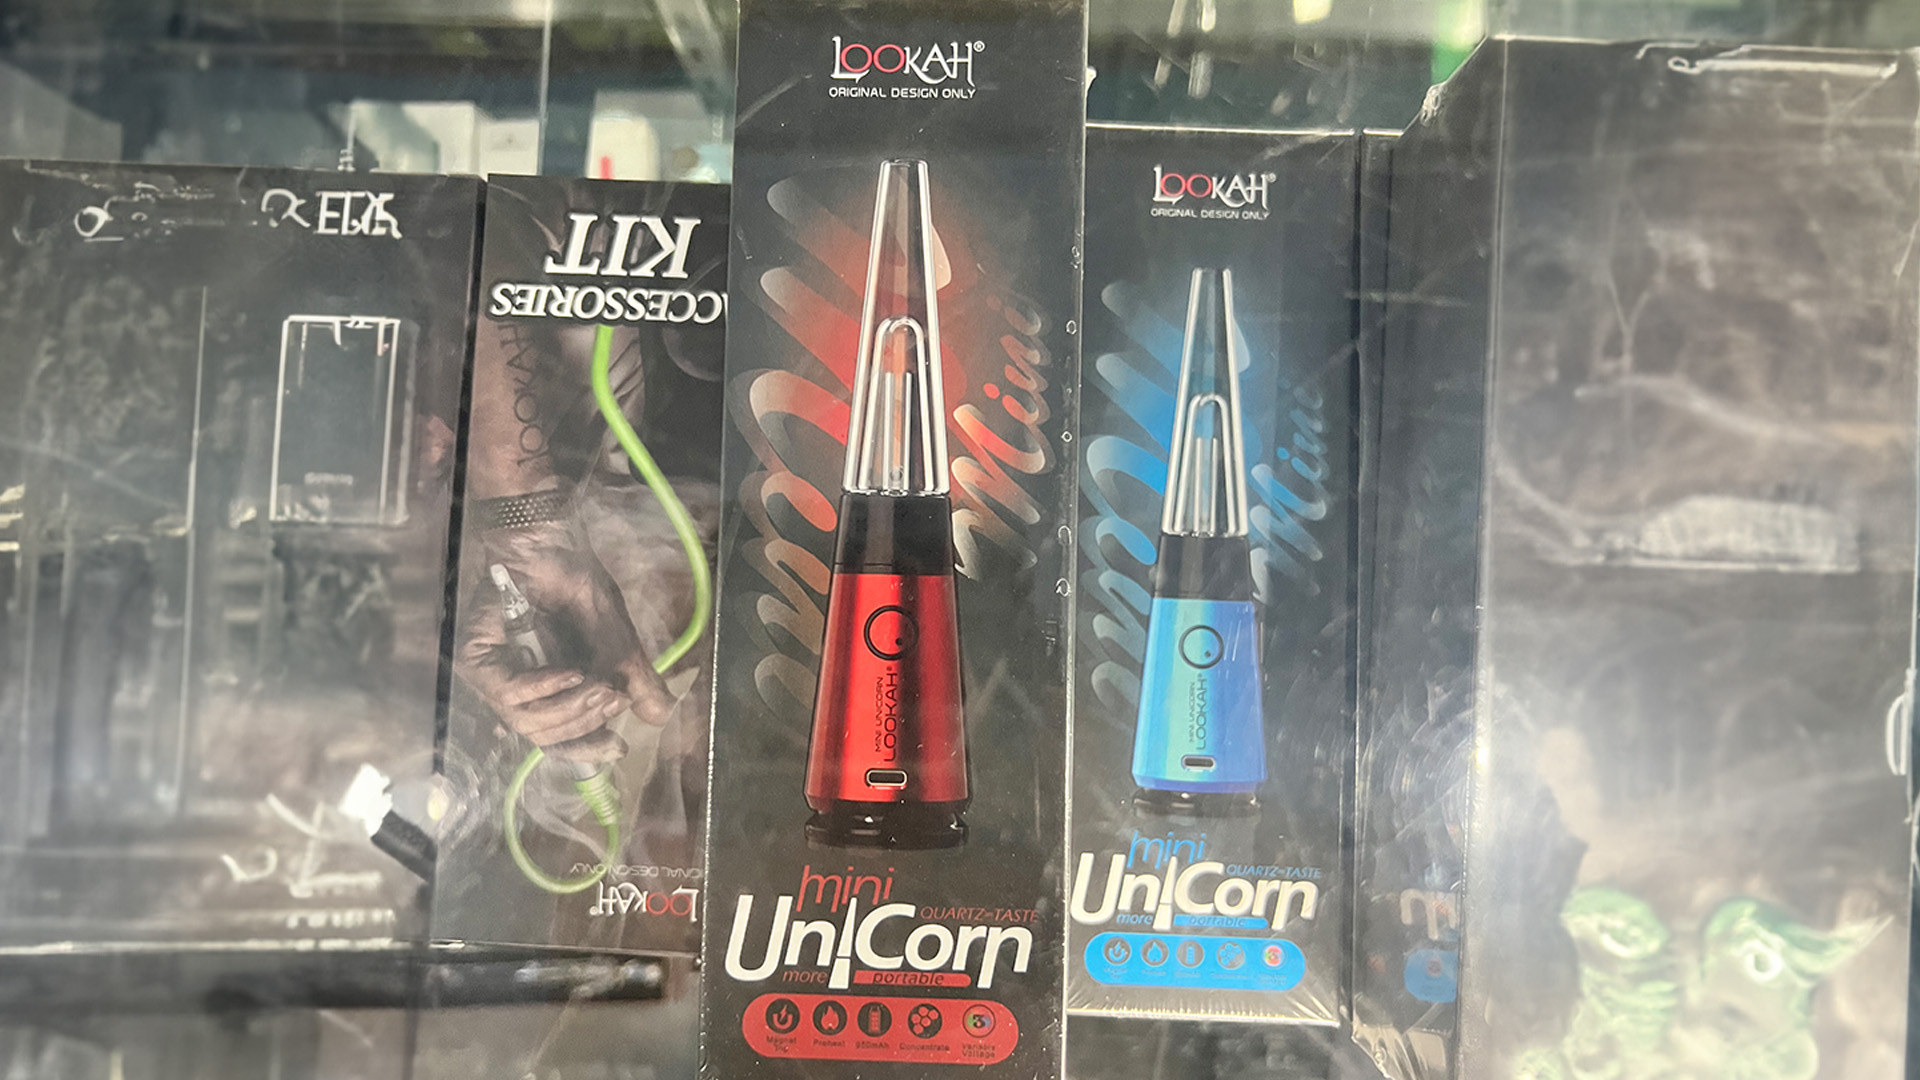 Get the Lookah Unicorn in Paradise Valley